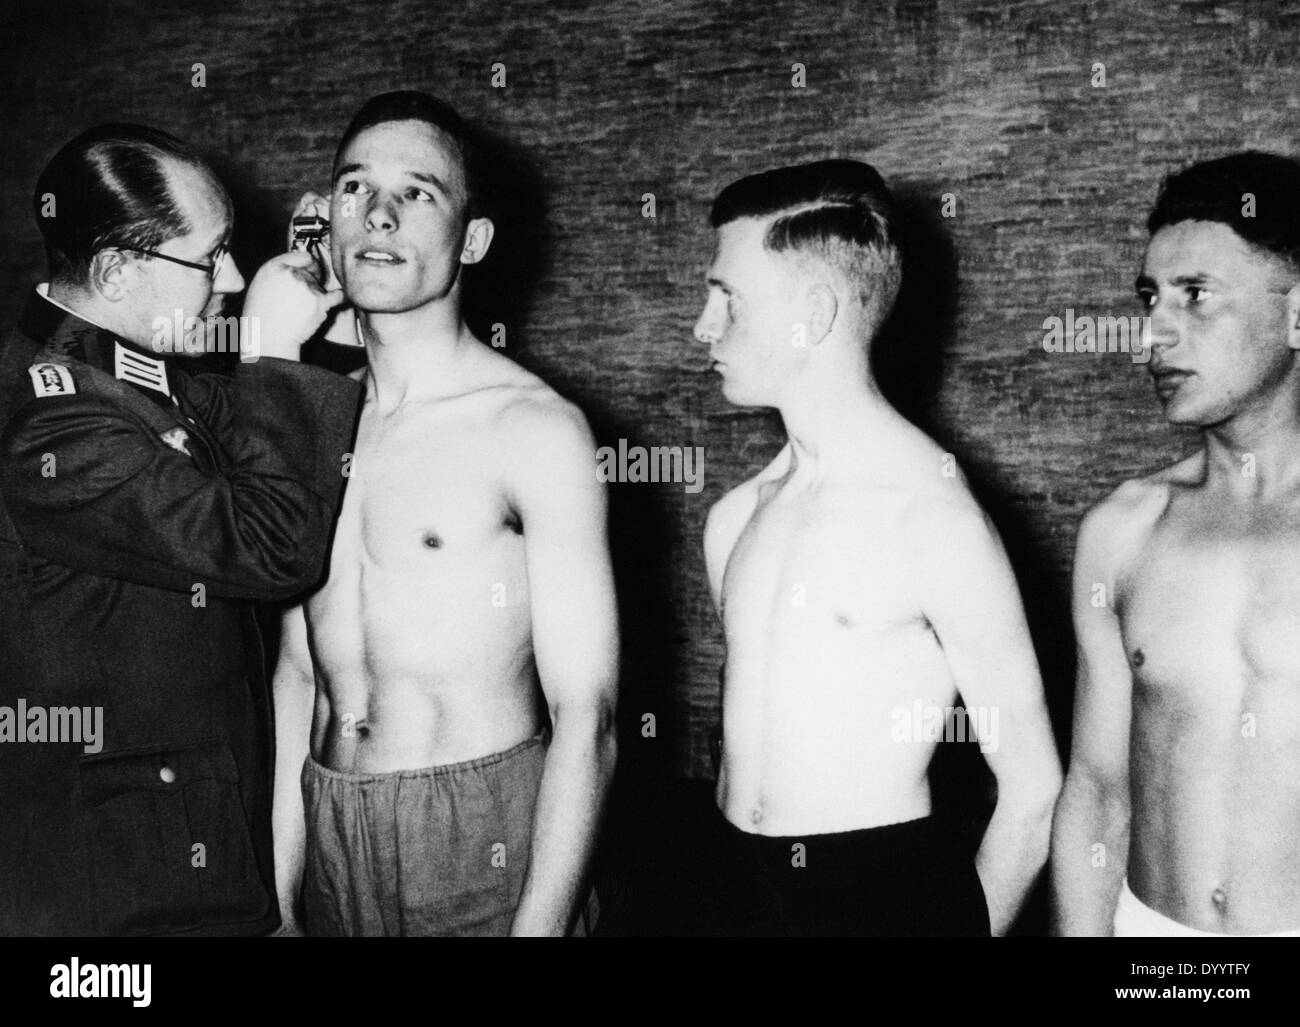 Recruiting young men for the Wehrmacht, 1935 Stock Photo